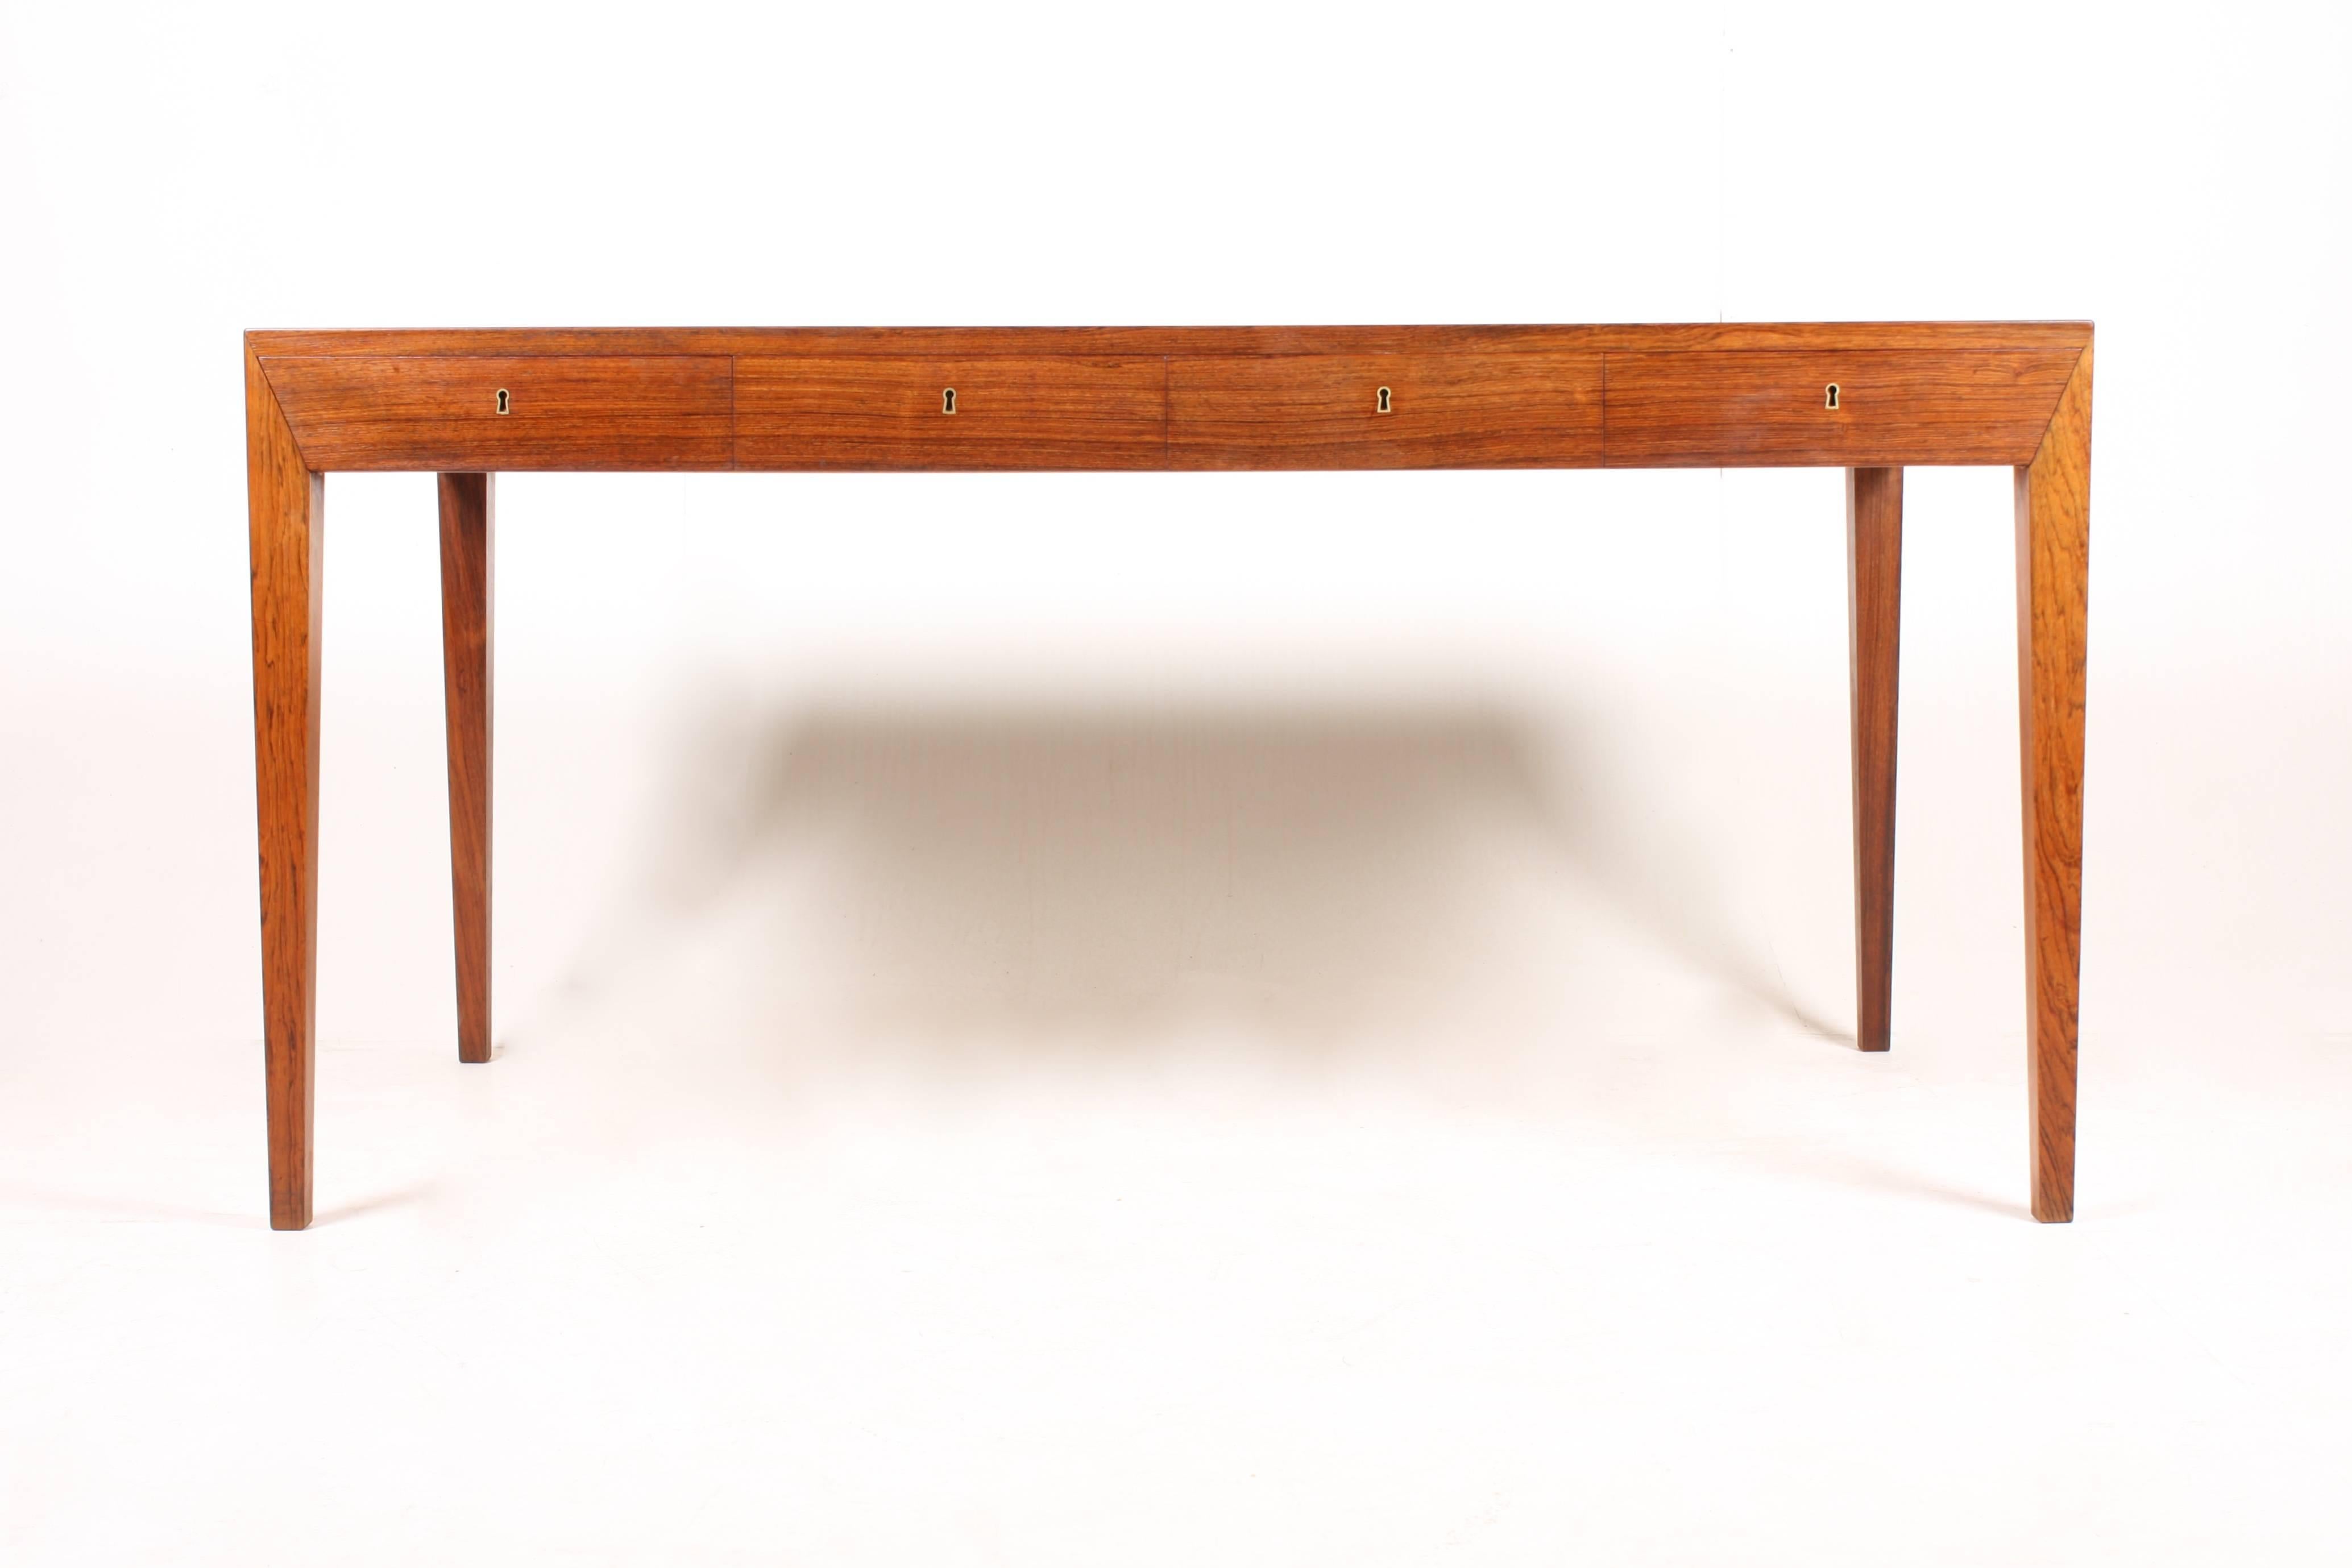 Elegant freestanding Danish design rosewood desk with four drawers designed by Severin Hansen Jr. for Haslev Furniture in the late 1950s. Made in Denmark, Great original condition.